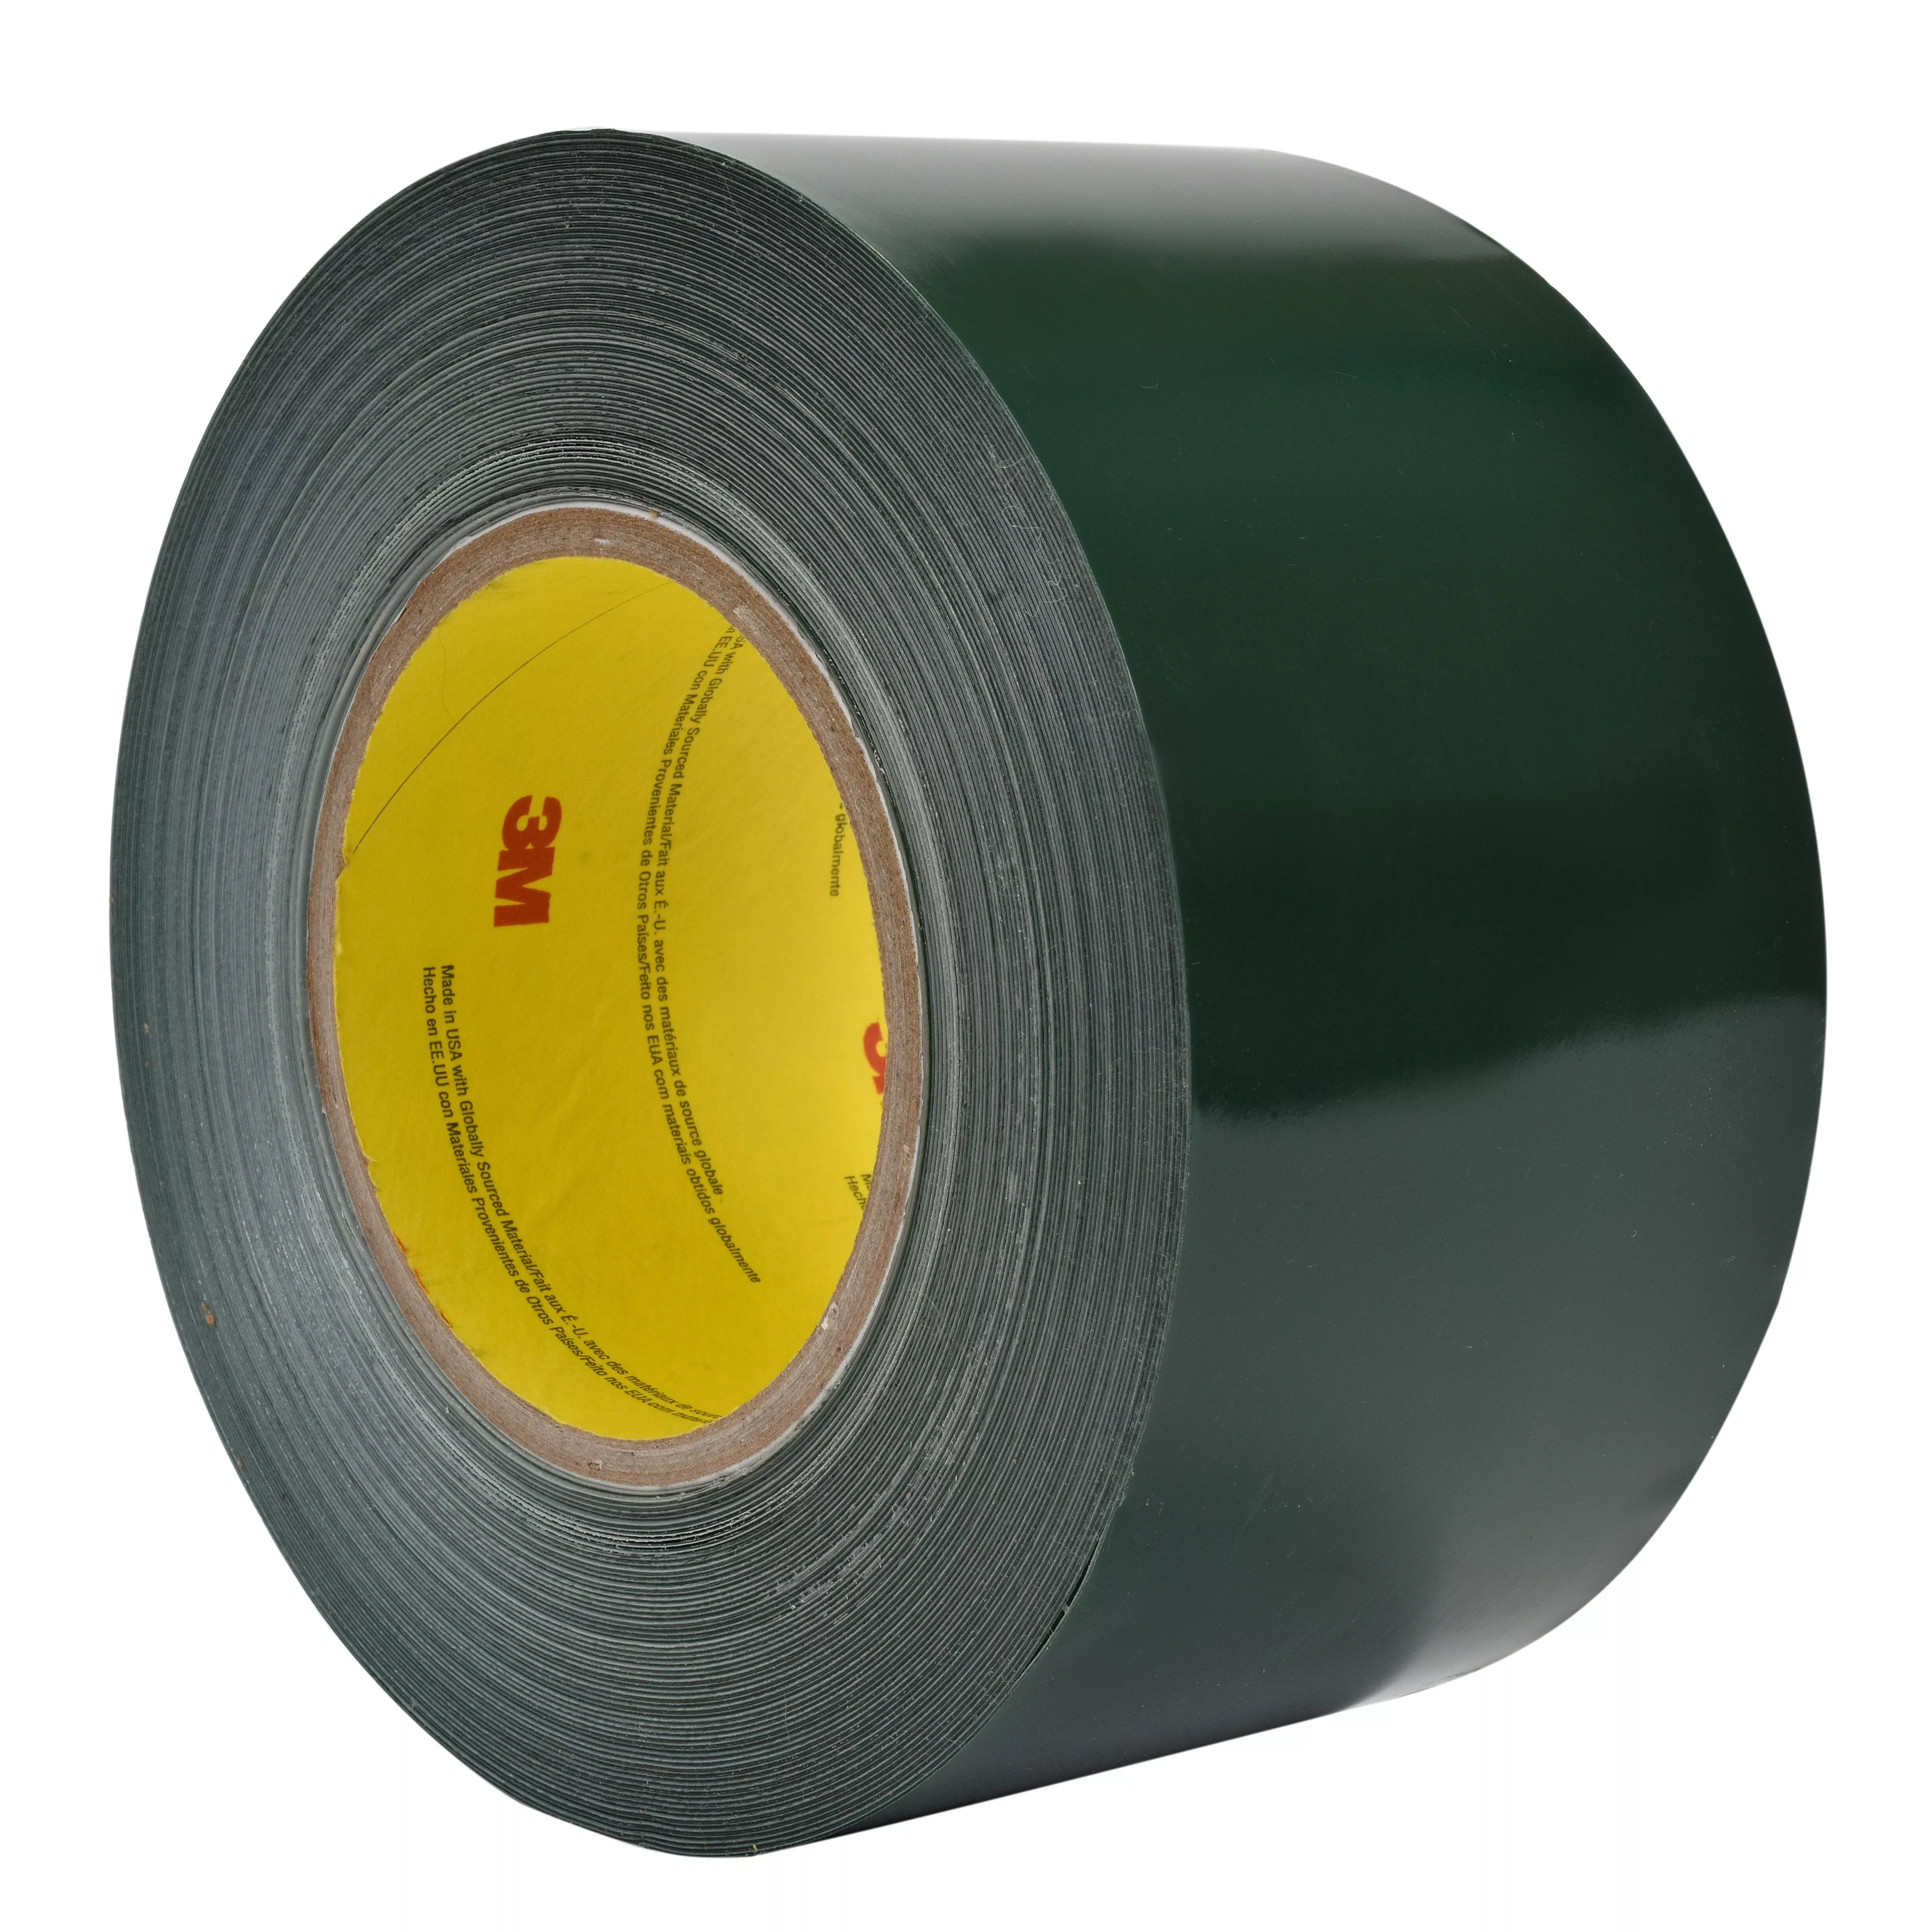 3M™ Sealing and Holding Tape 8069, 1 in x 25 yd, 36 Roll/Case, Solid Liner